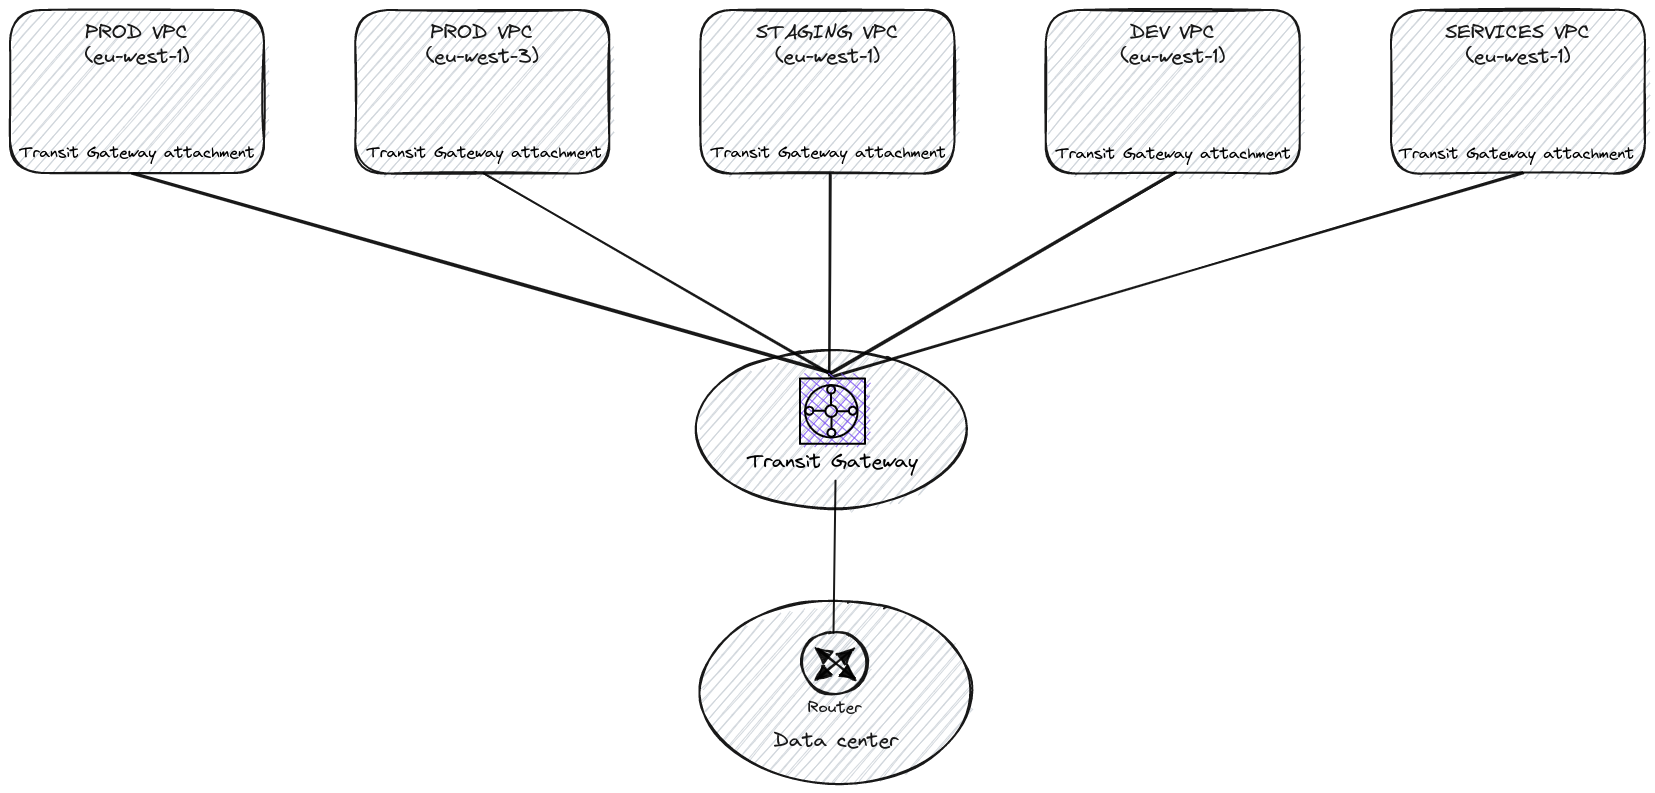 Network architecture with Transit Gateway